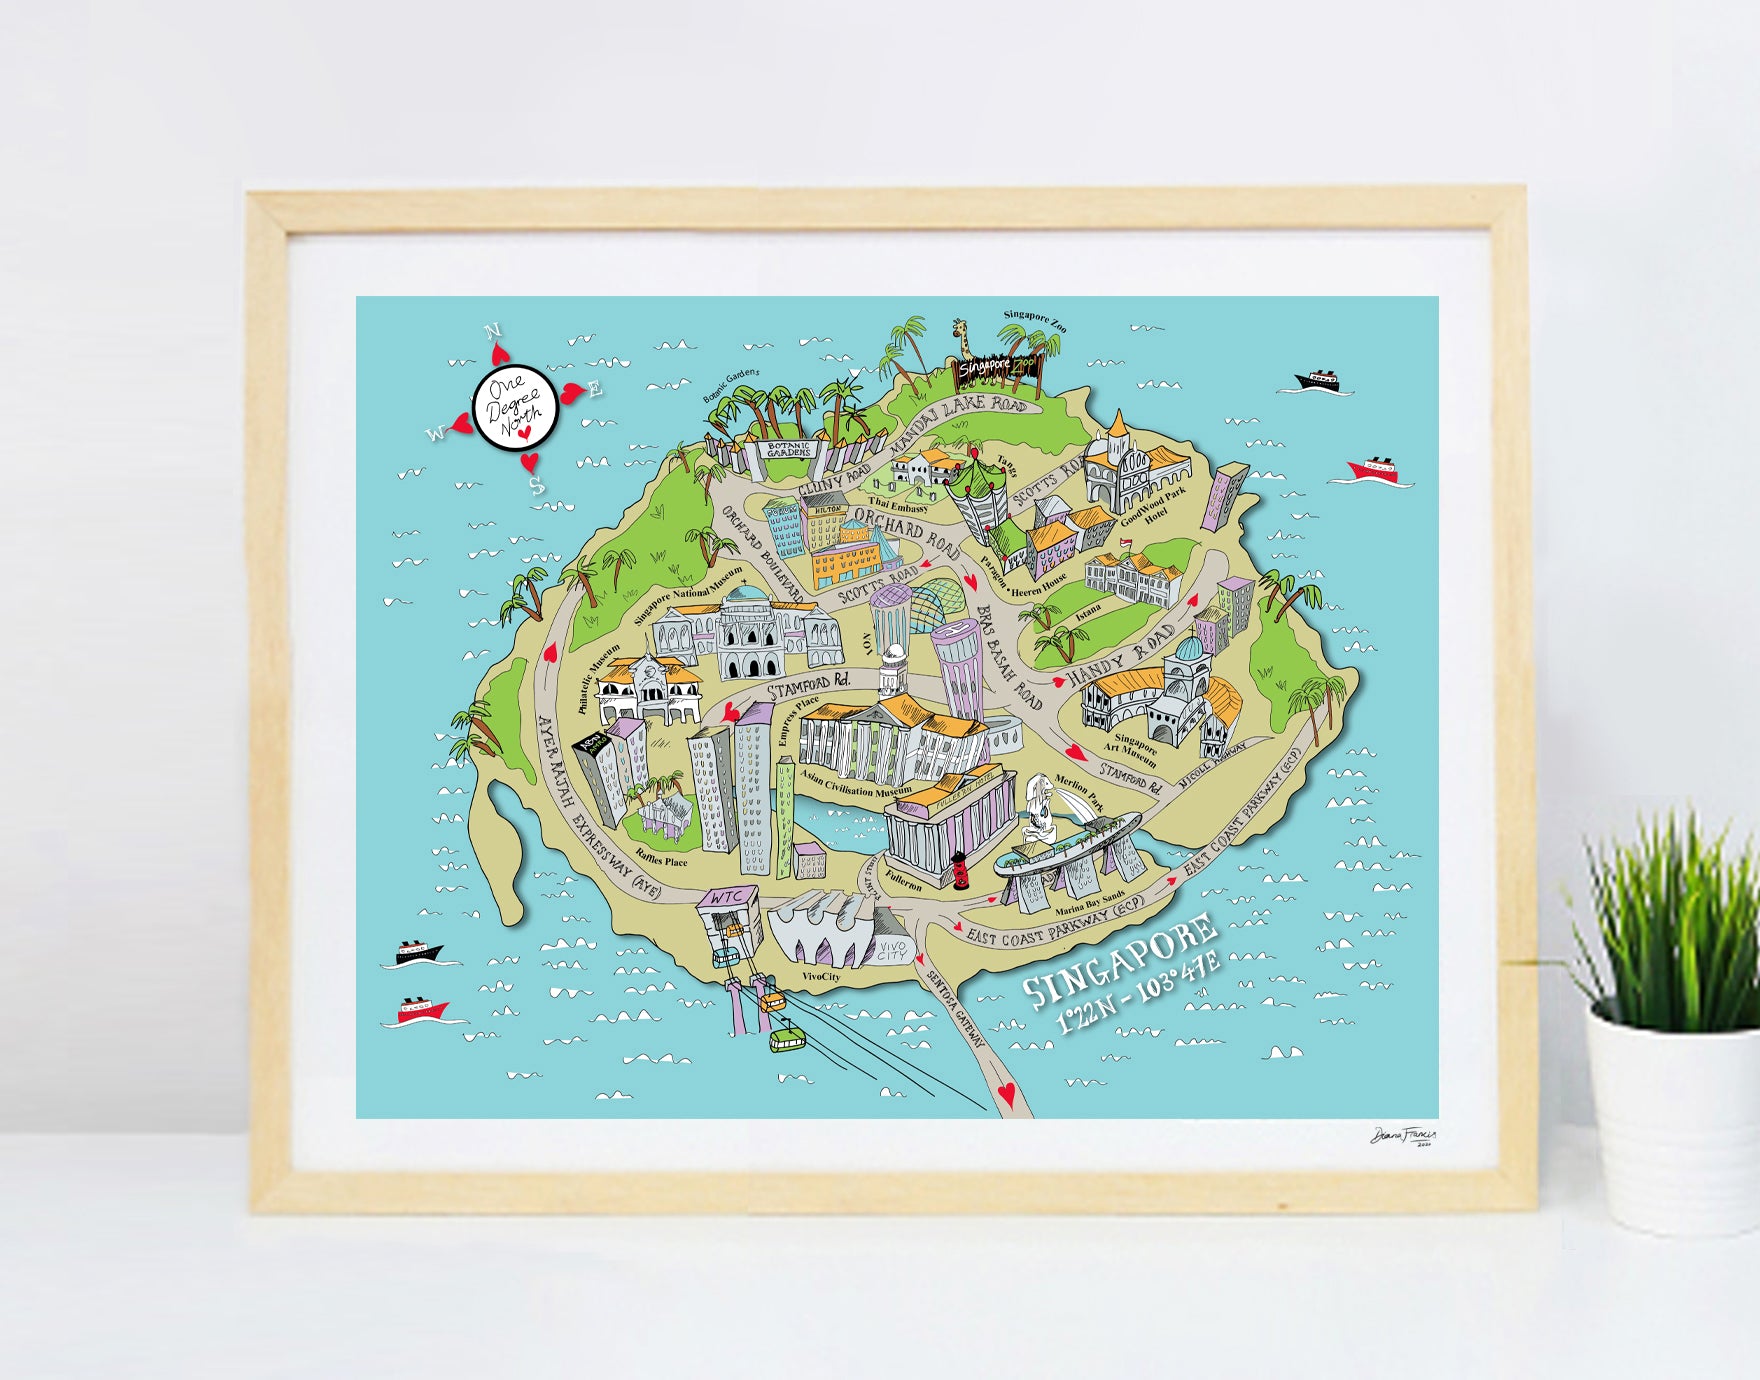 Illustrated Global Maps